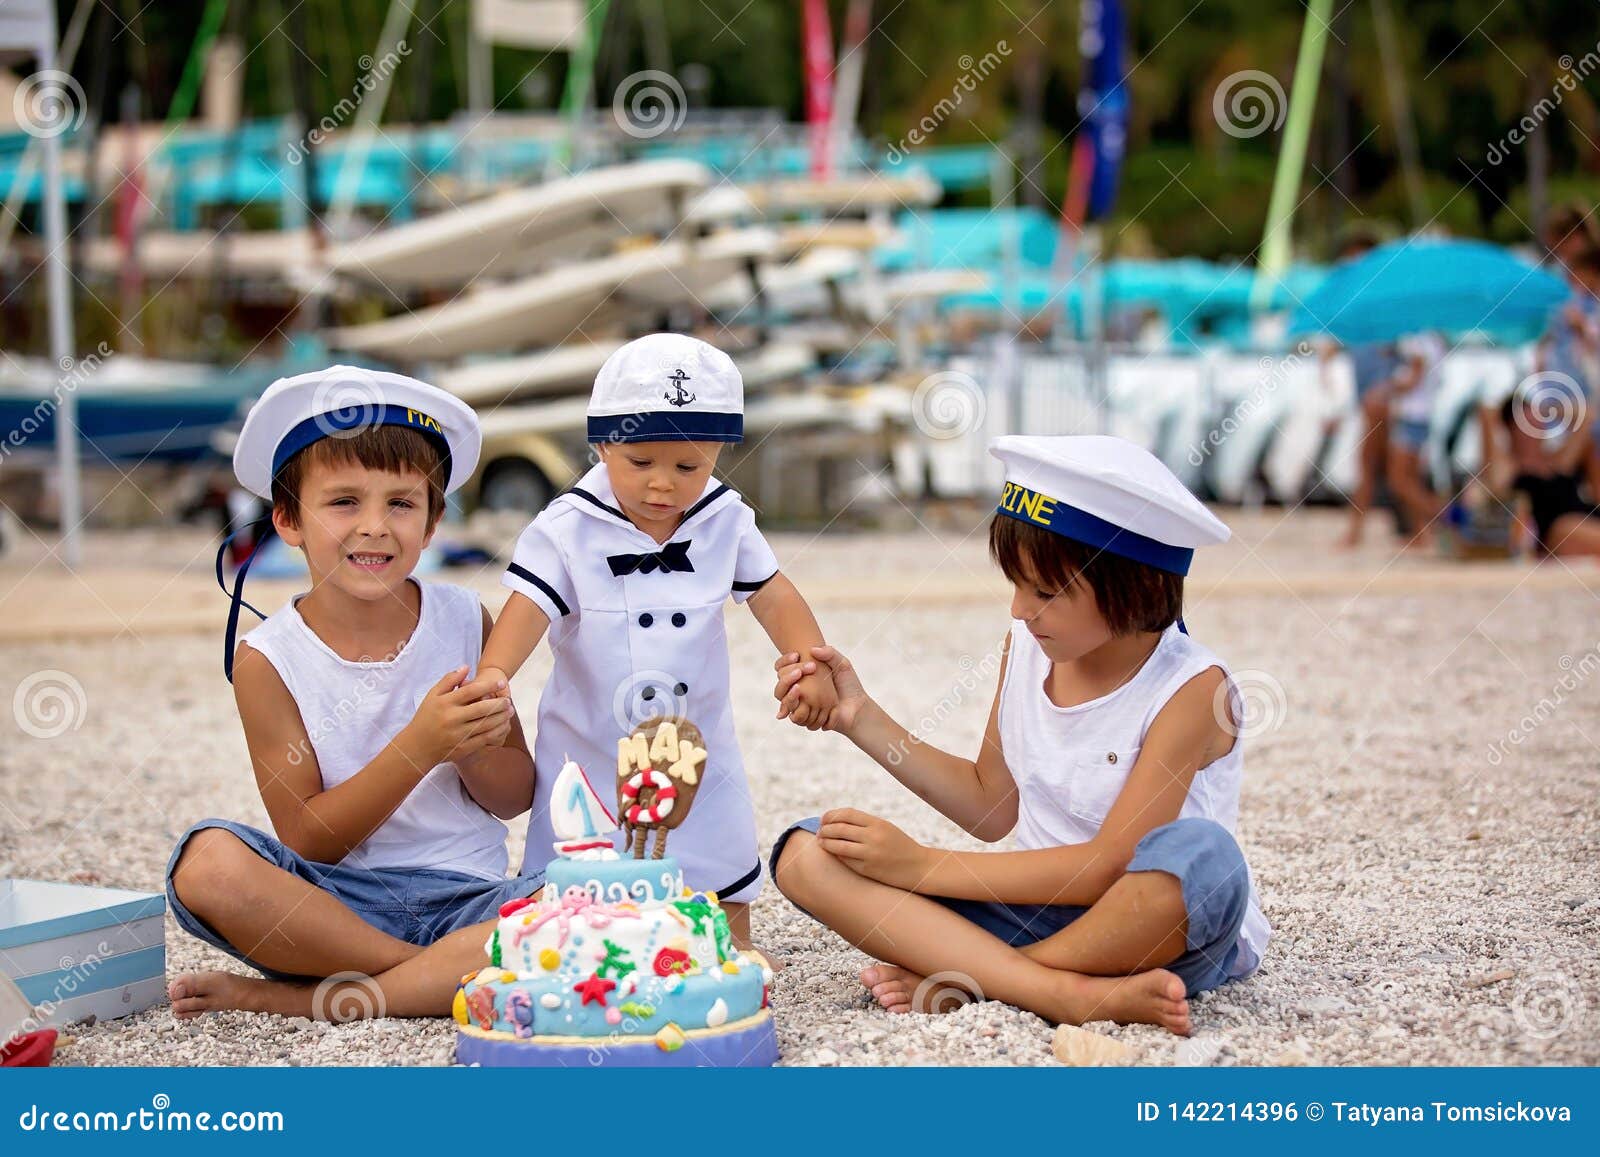 Sweet Baby Boy And His Brothers Celebrating First Birthday With Sea Theme Cake And Decoration Stock Photo Image Of Beach Decorated 142214396